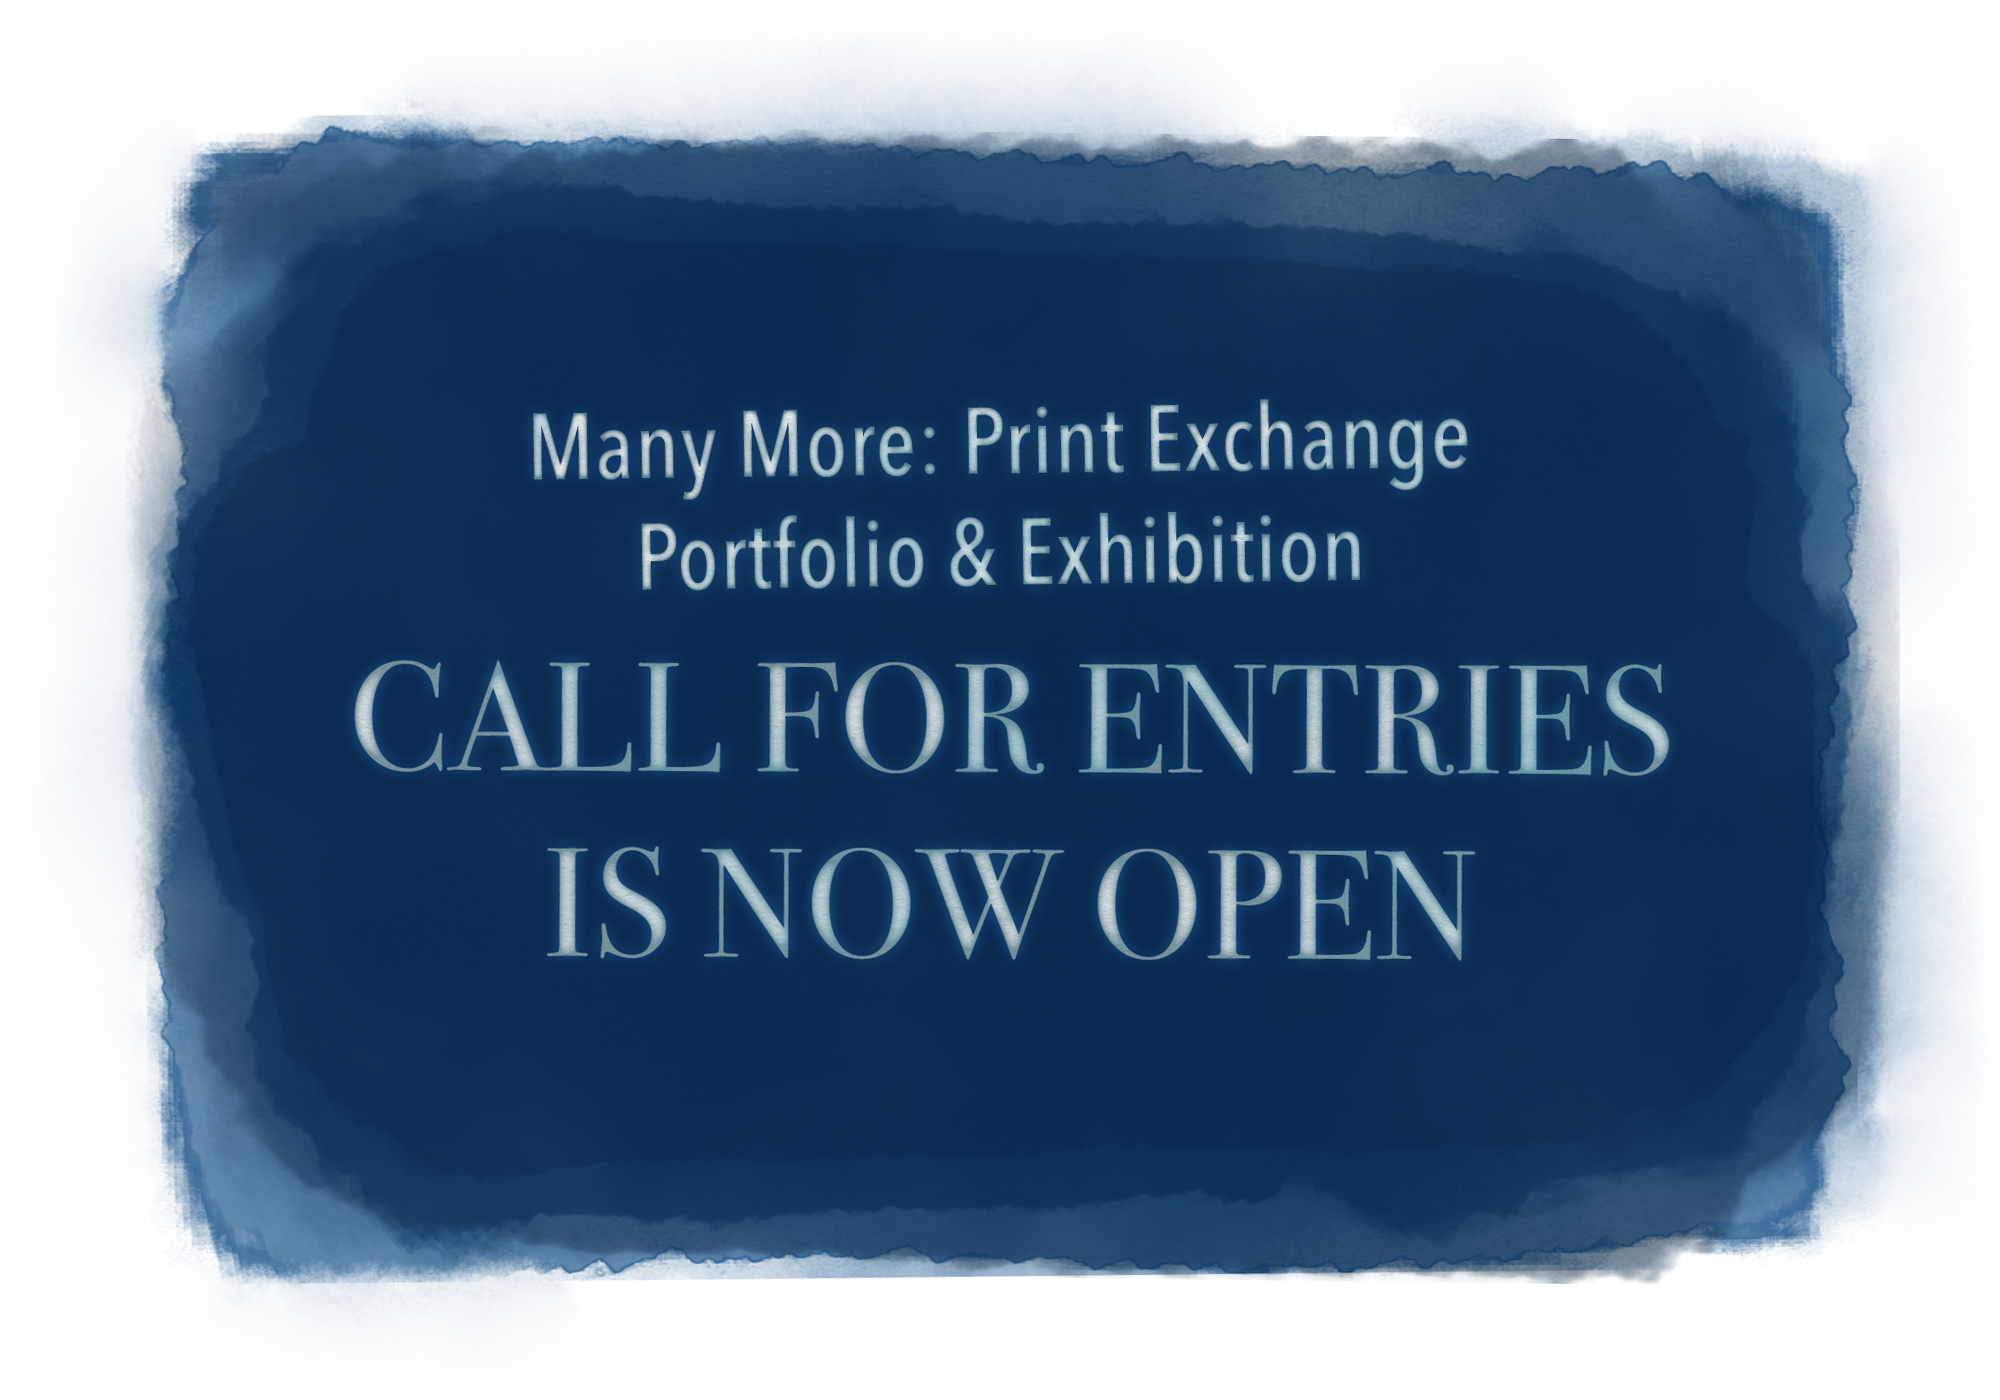 A title card showing the words "Many More: Print Exchange Portfolio & Exhibition — CALL FOR ENTRIES IS NOW OPEN"